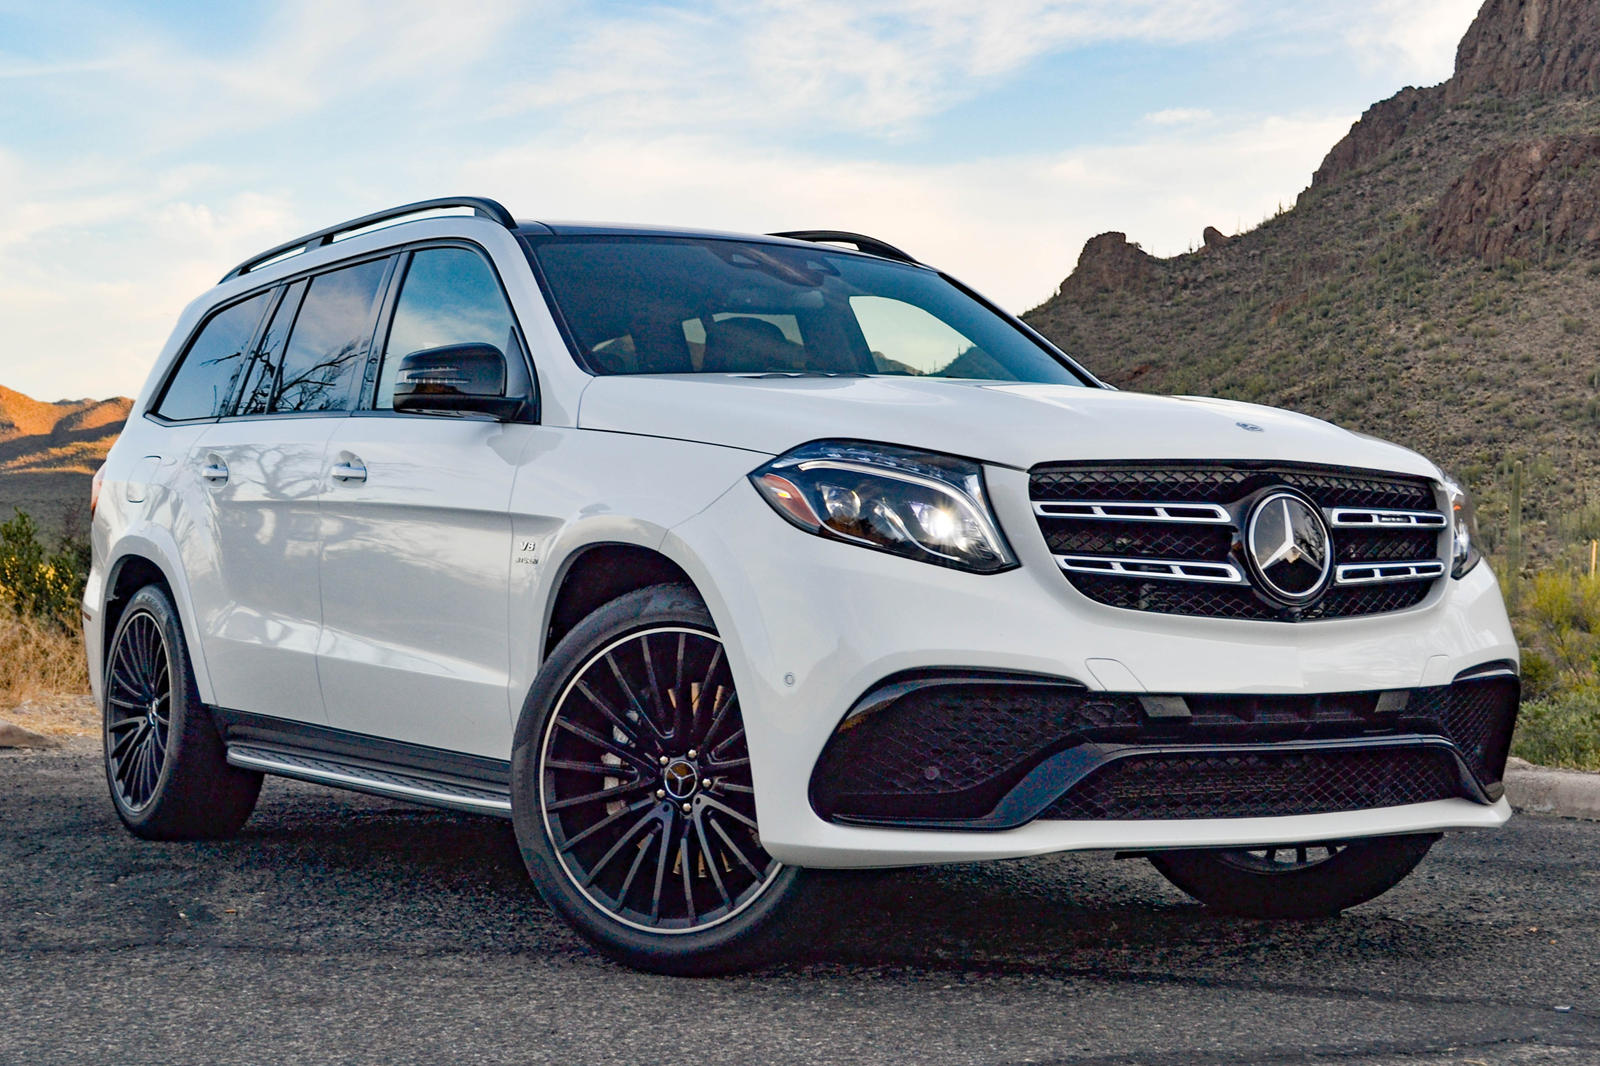 2019 Mercedes-AMG GLS 63 Review, Pricing | AMG GLS 63 SUV Models | CarBuzz